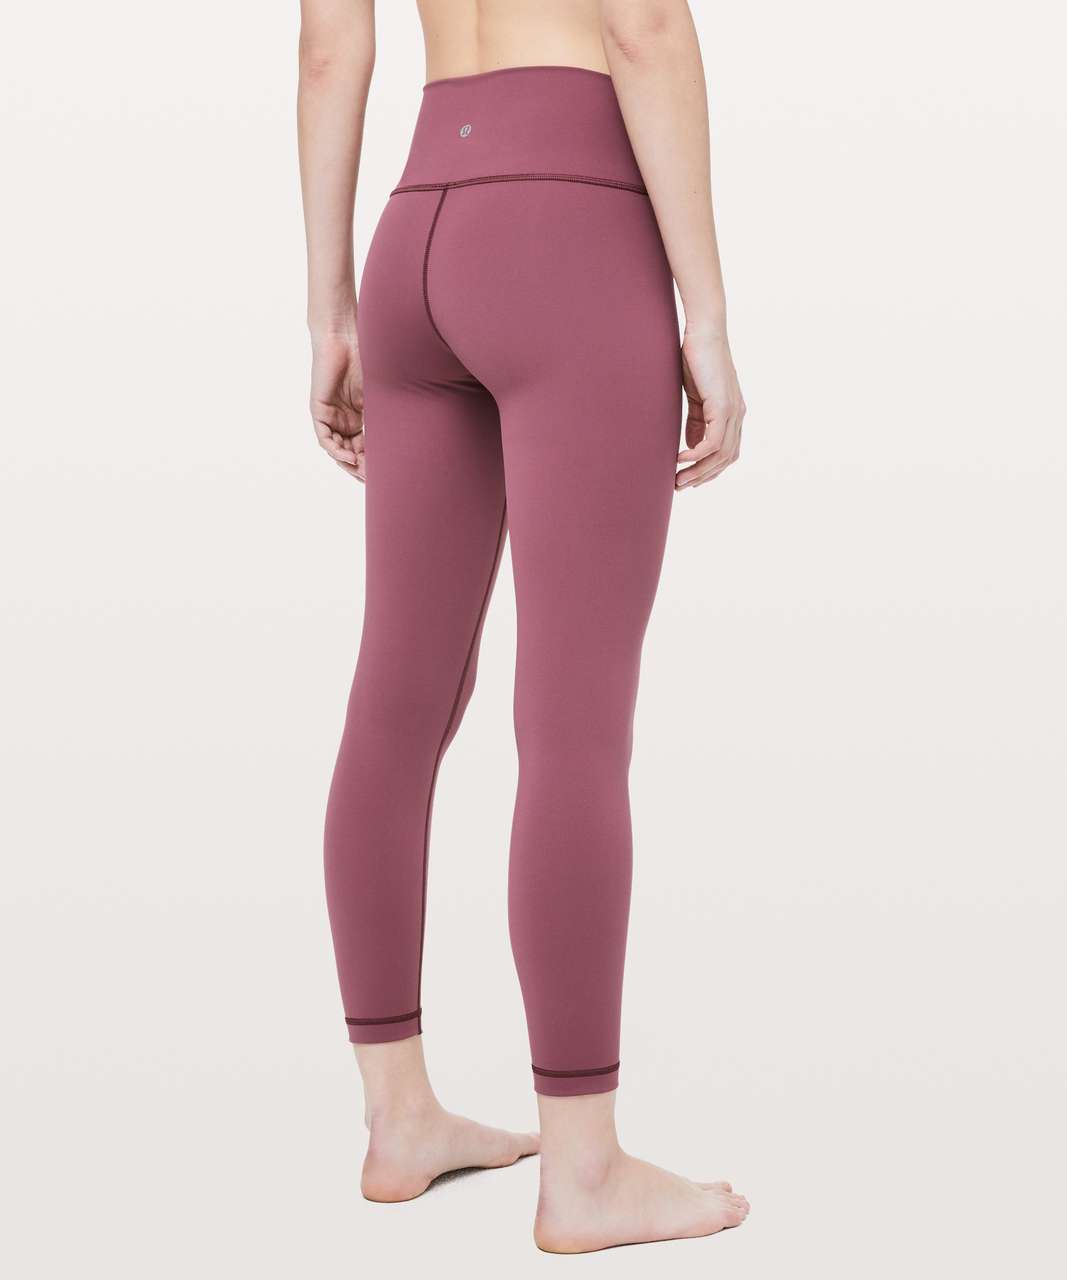 Lululemon Wunder Under High-Rise Tight 25 *Full-On Luxtreme - Cassis  (First Release) - lulu fanatics